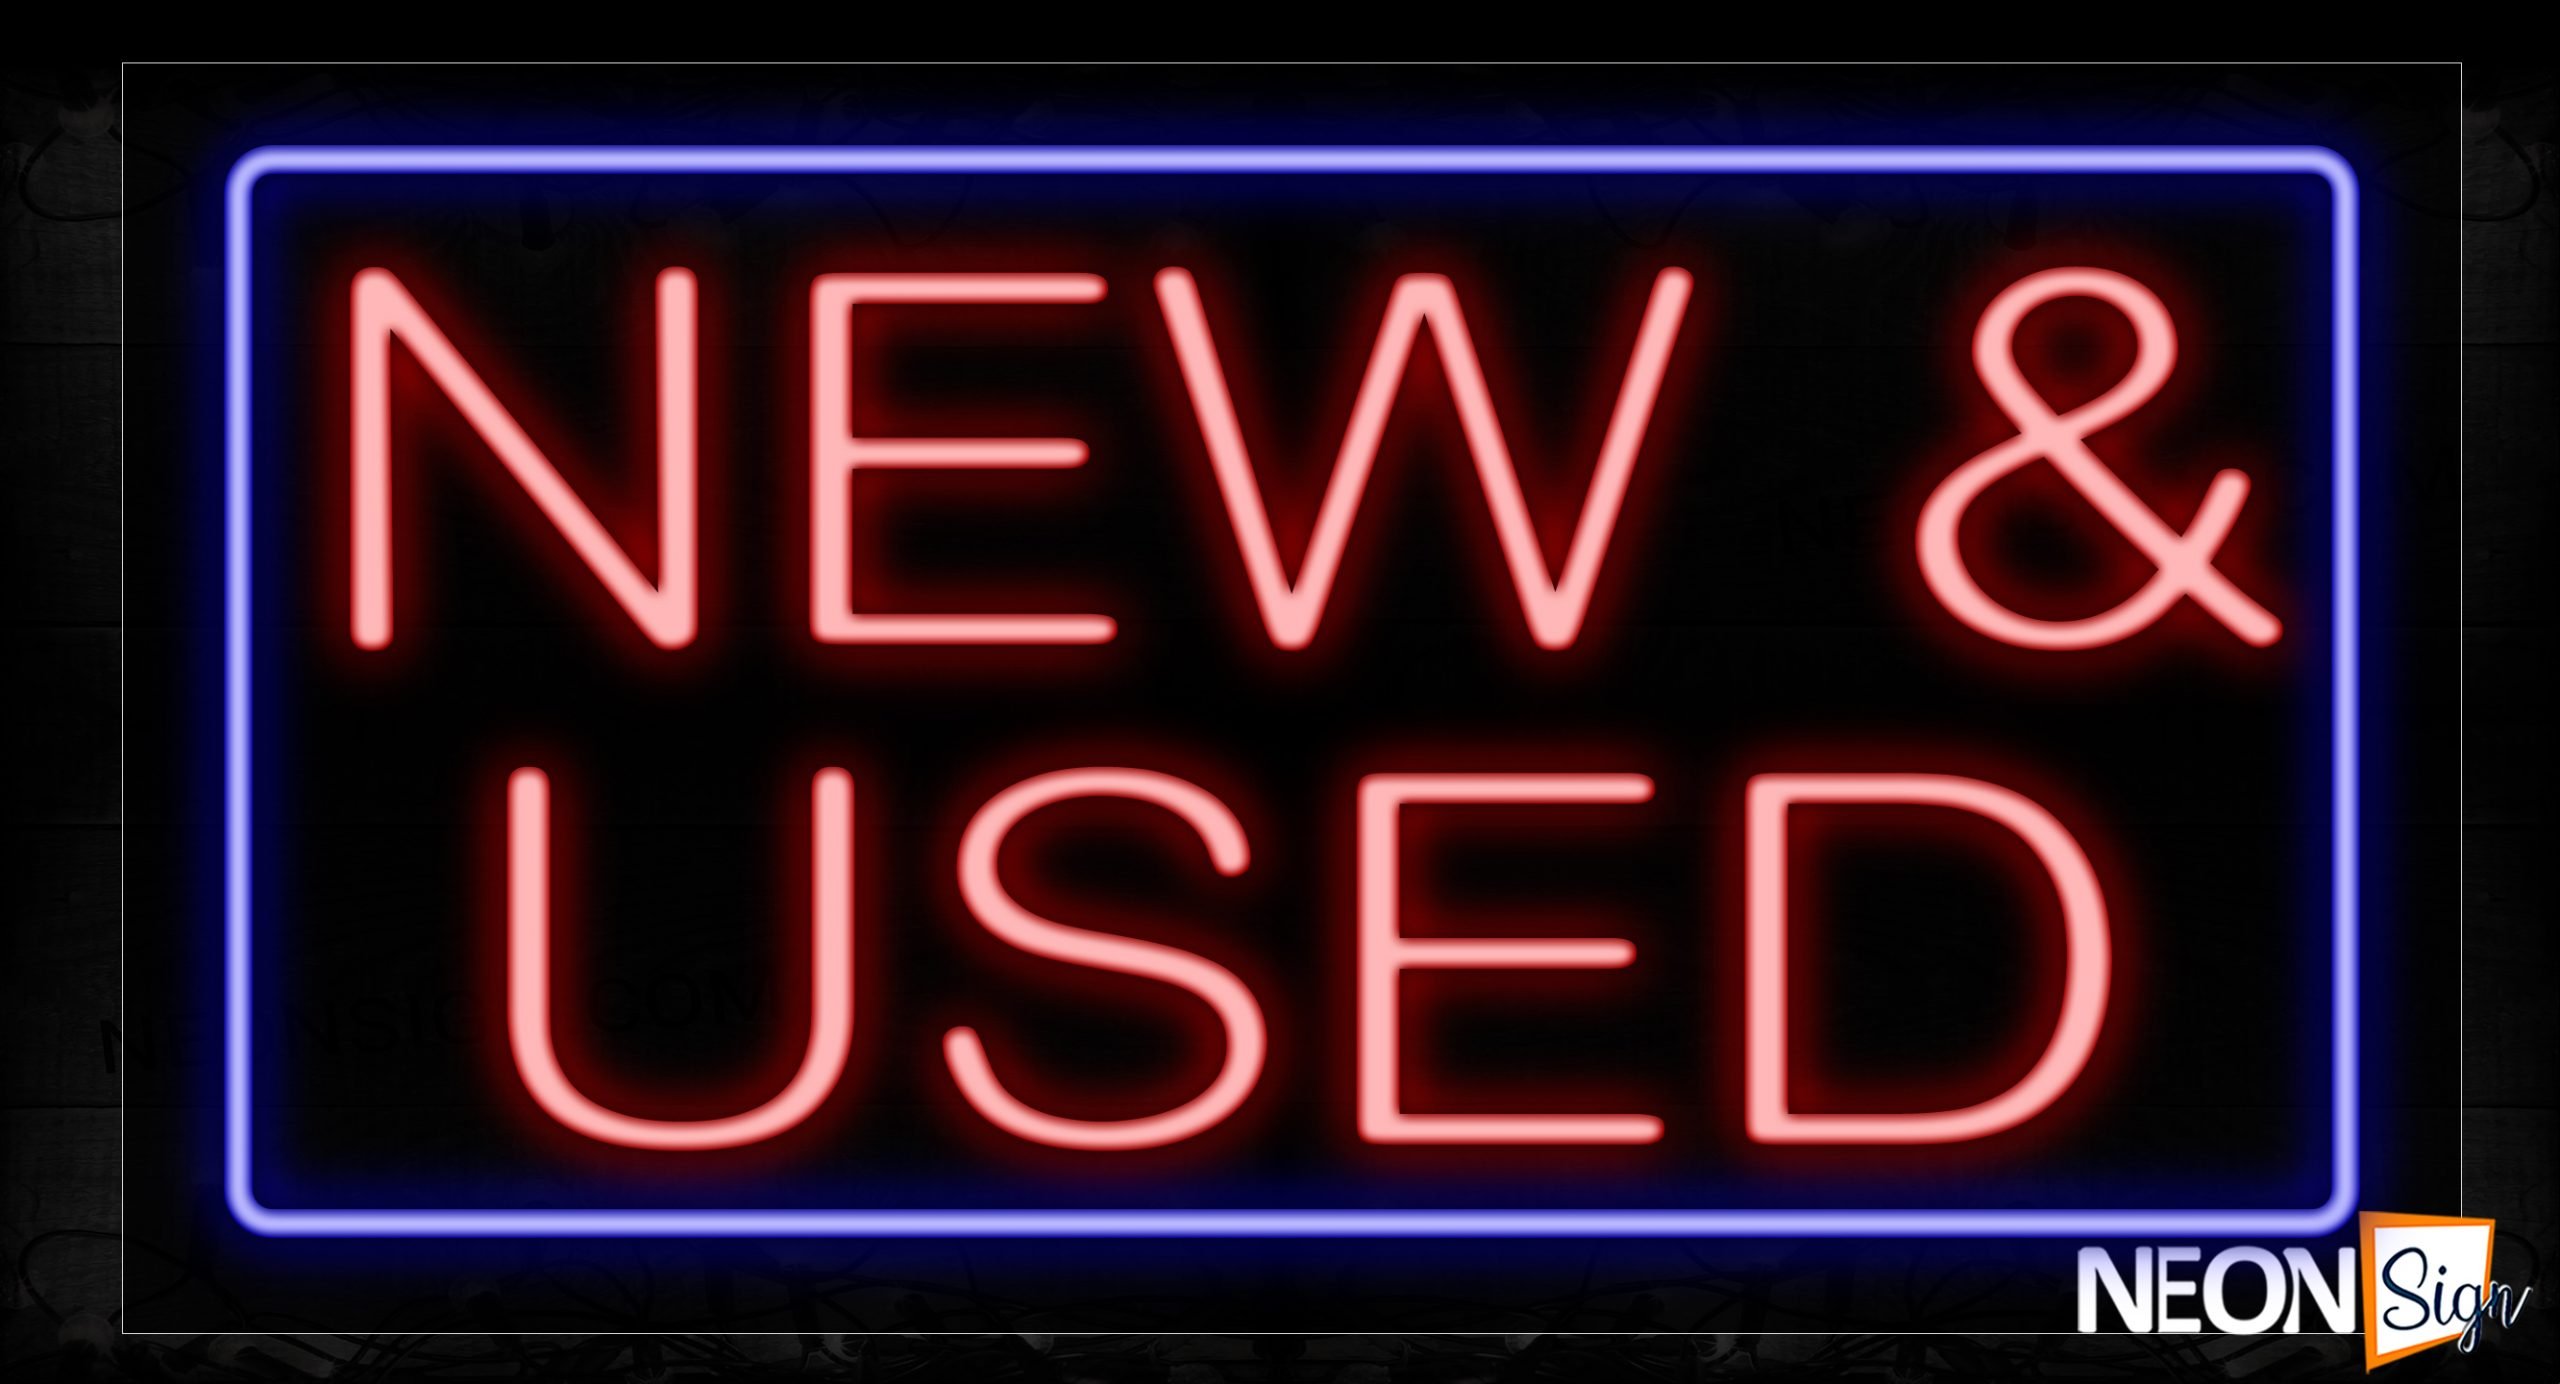 Image of 11754 New & Used In Red With Blue Border Neon Signs_20x37 Black Backing